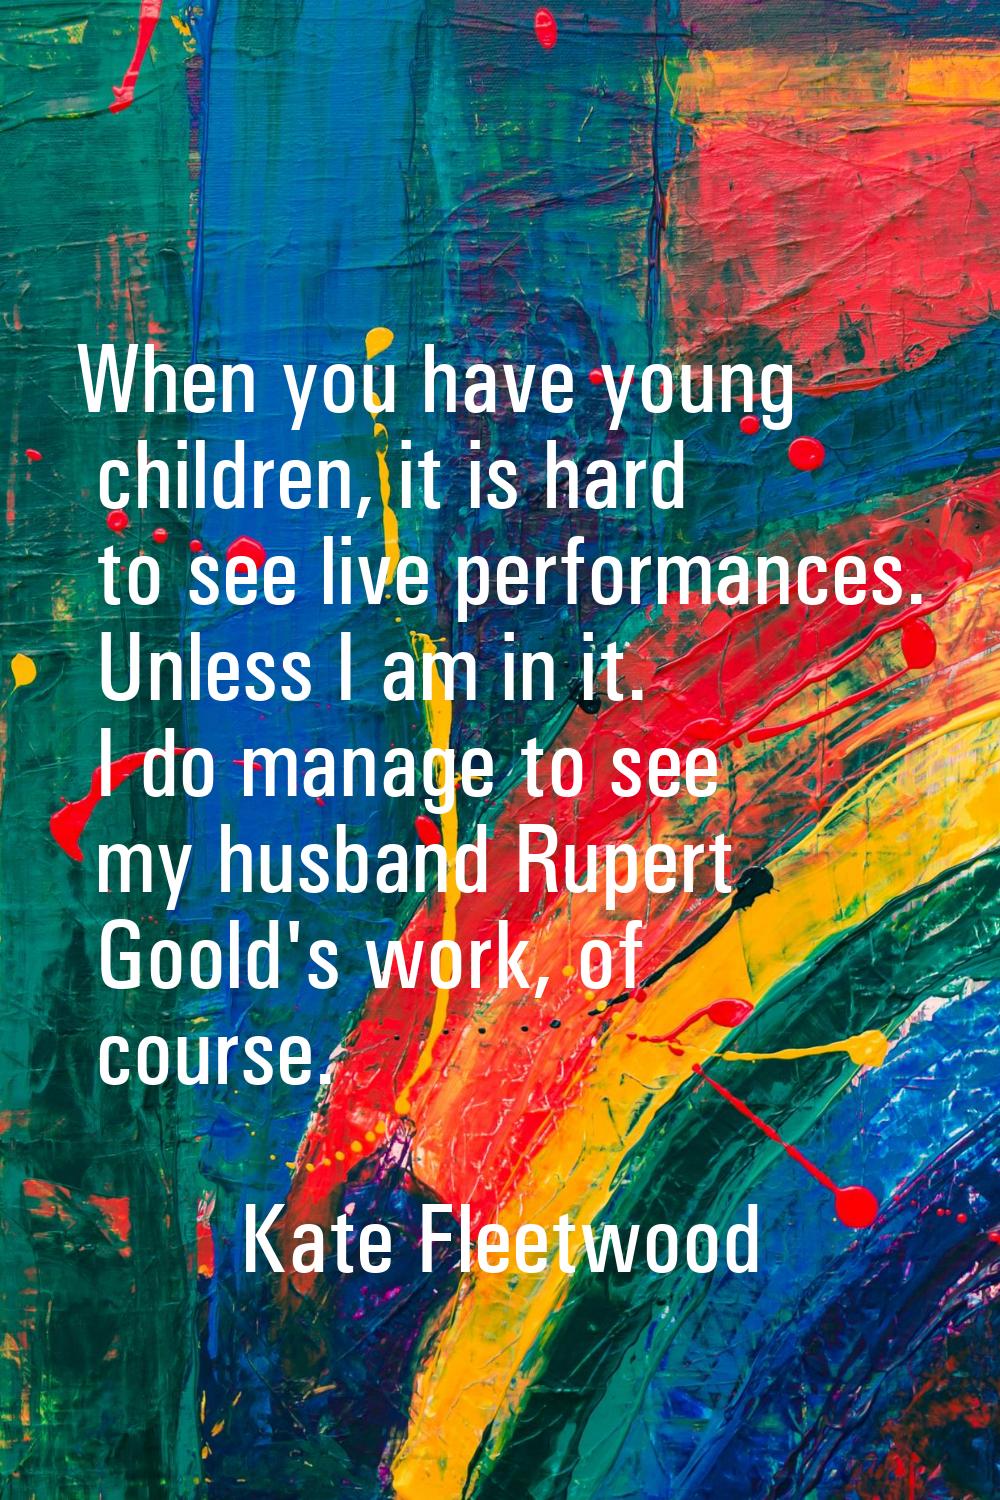 When you have young children, it is hard to see live performances. Unless I am in it. I do manage t